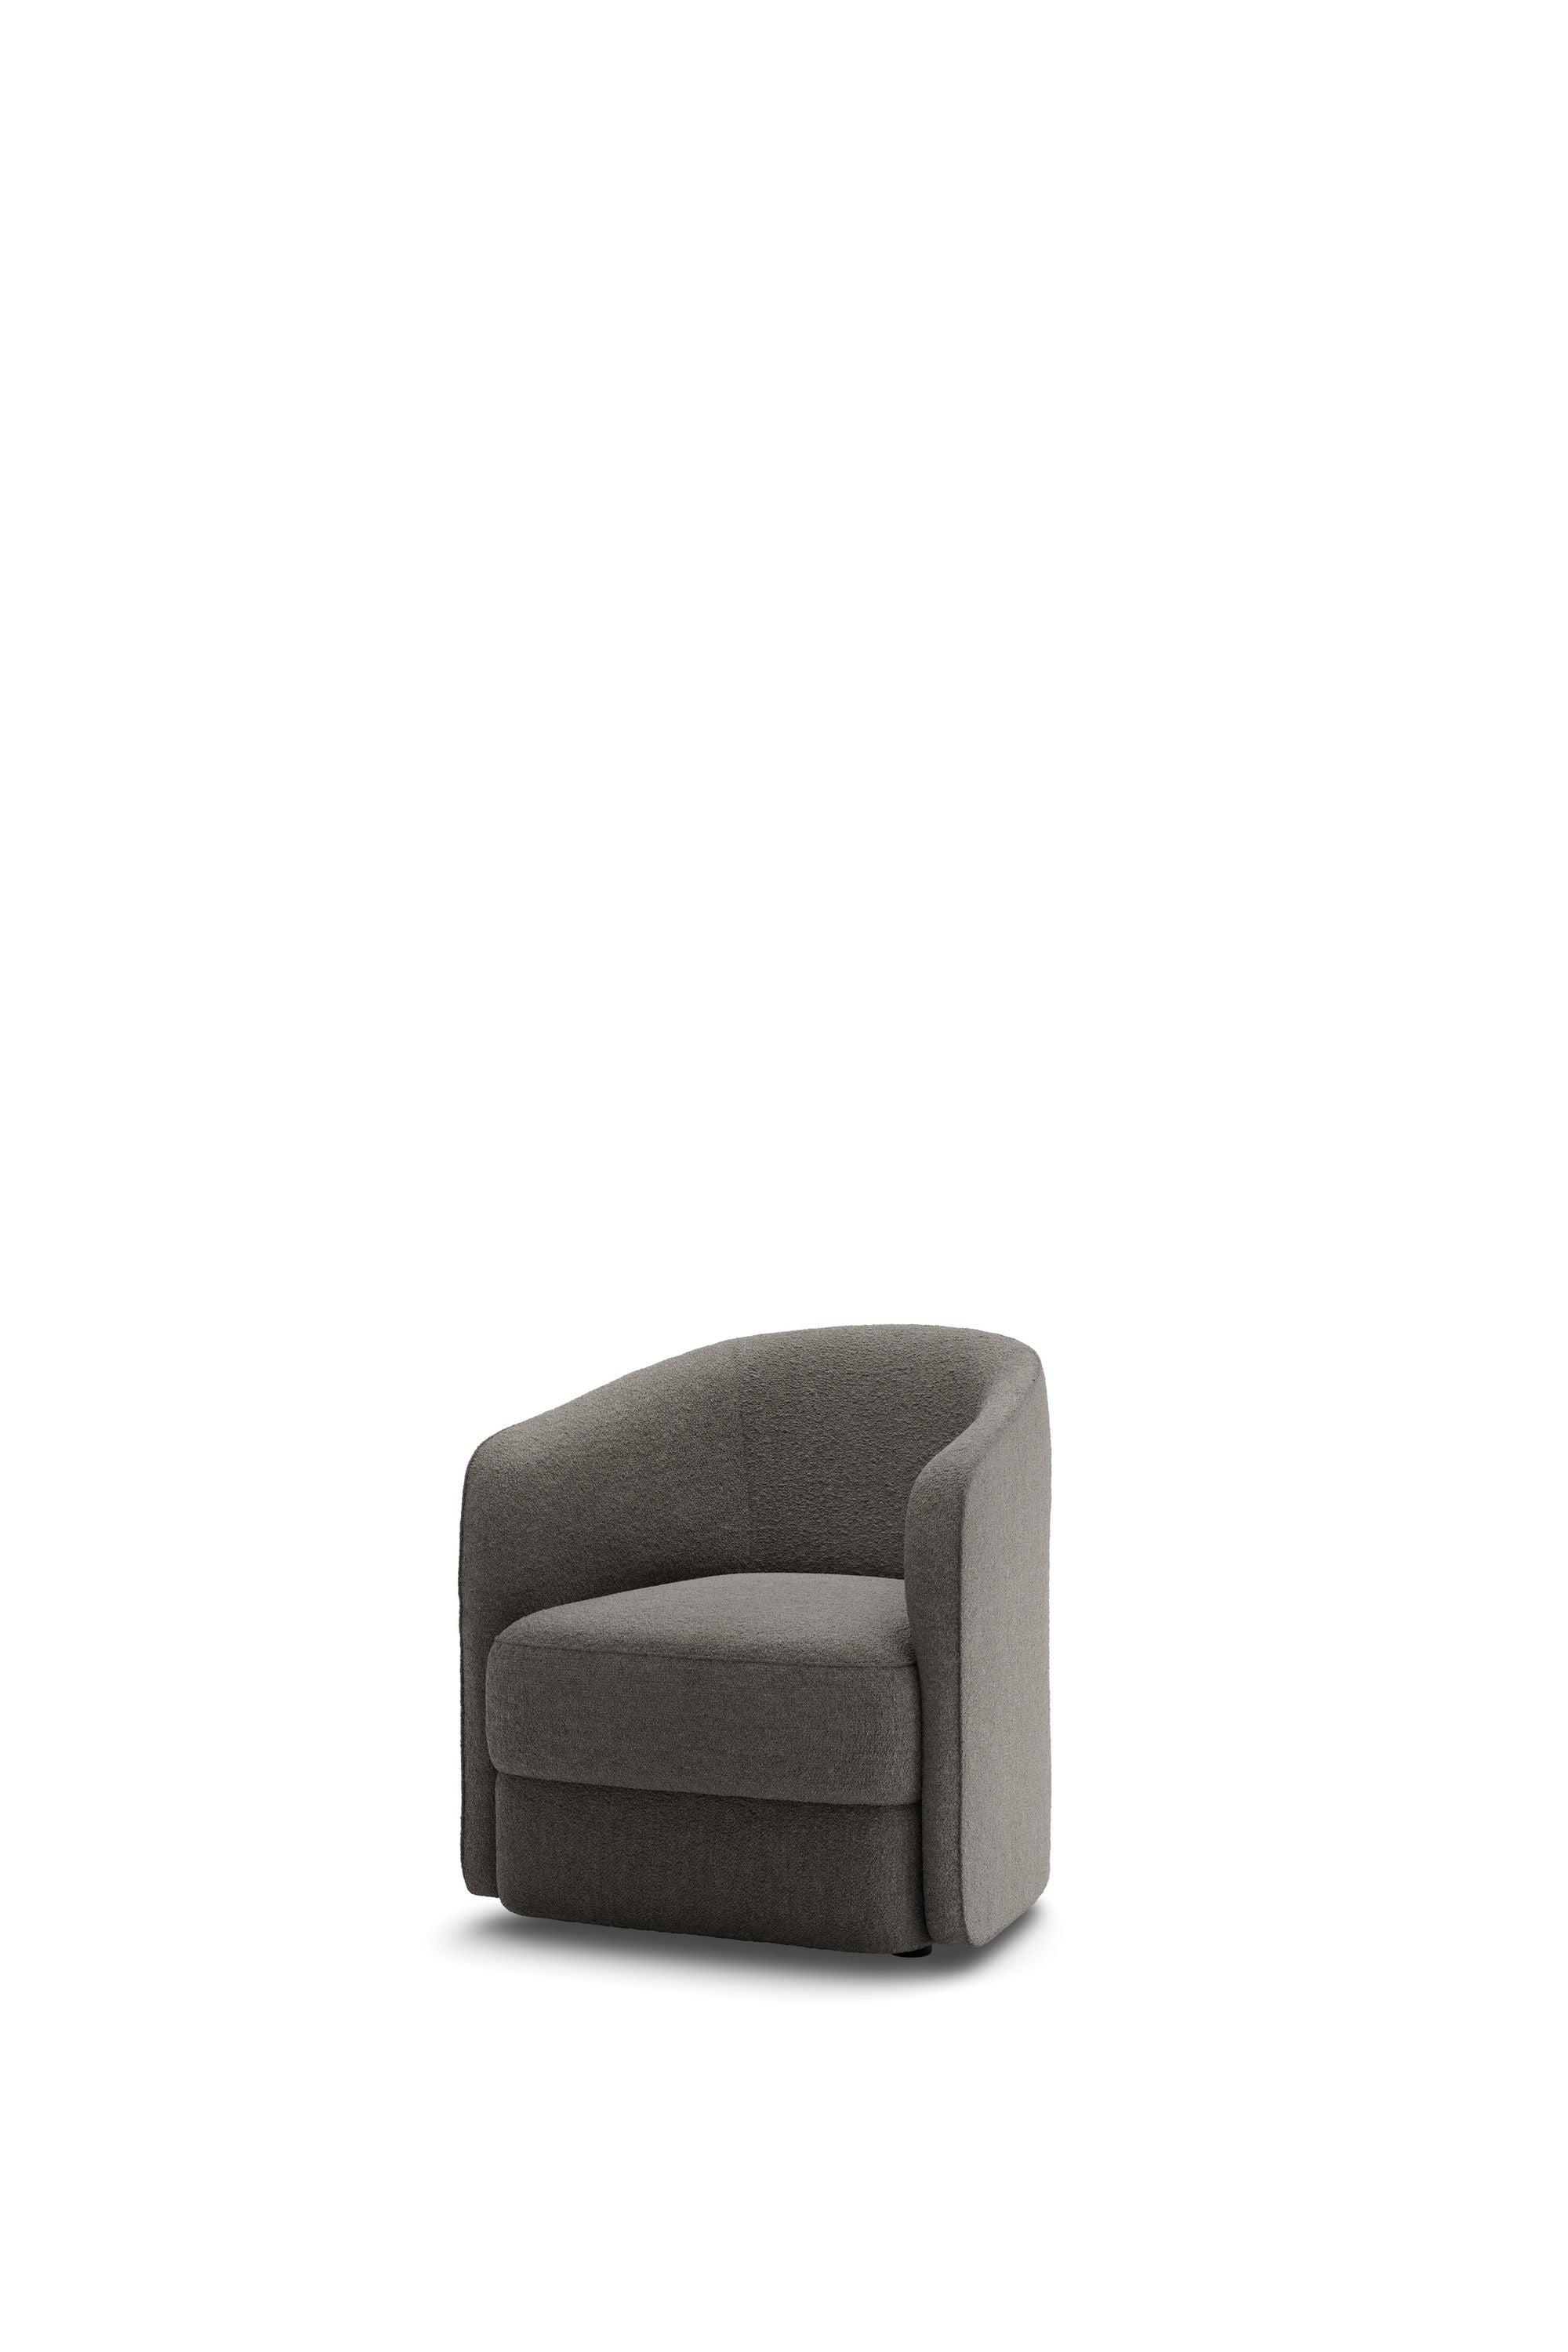 Neue Arbeiten Covent Lounge Chair Schmale, dunkle Taupe